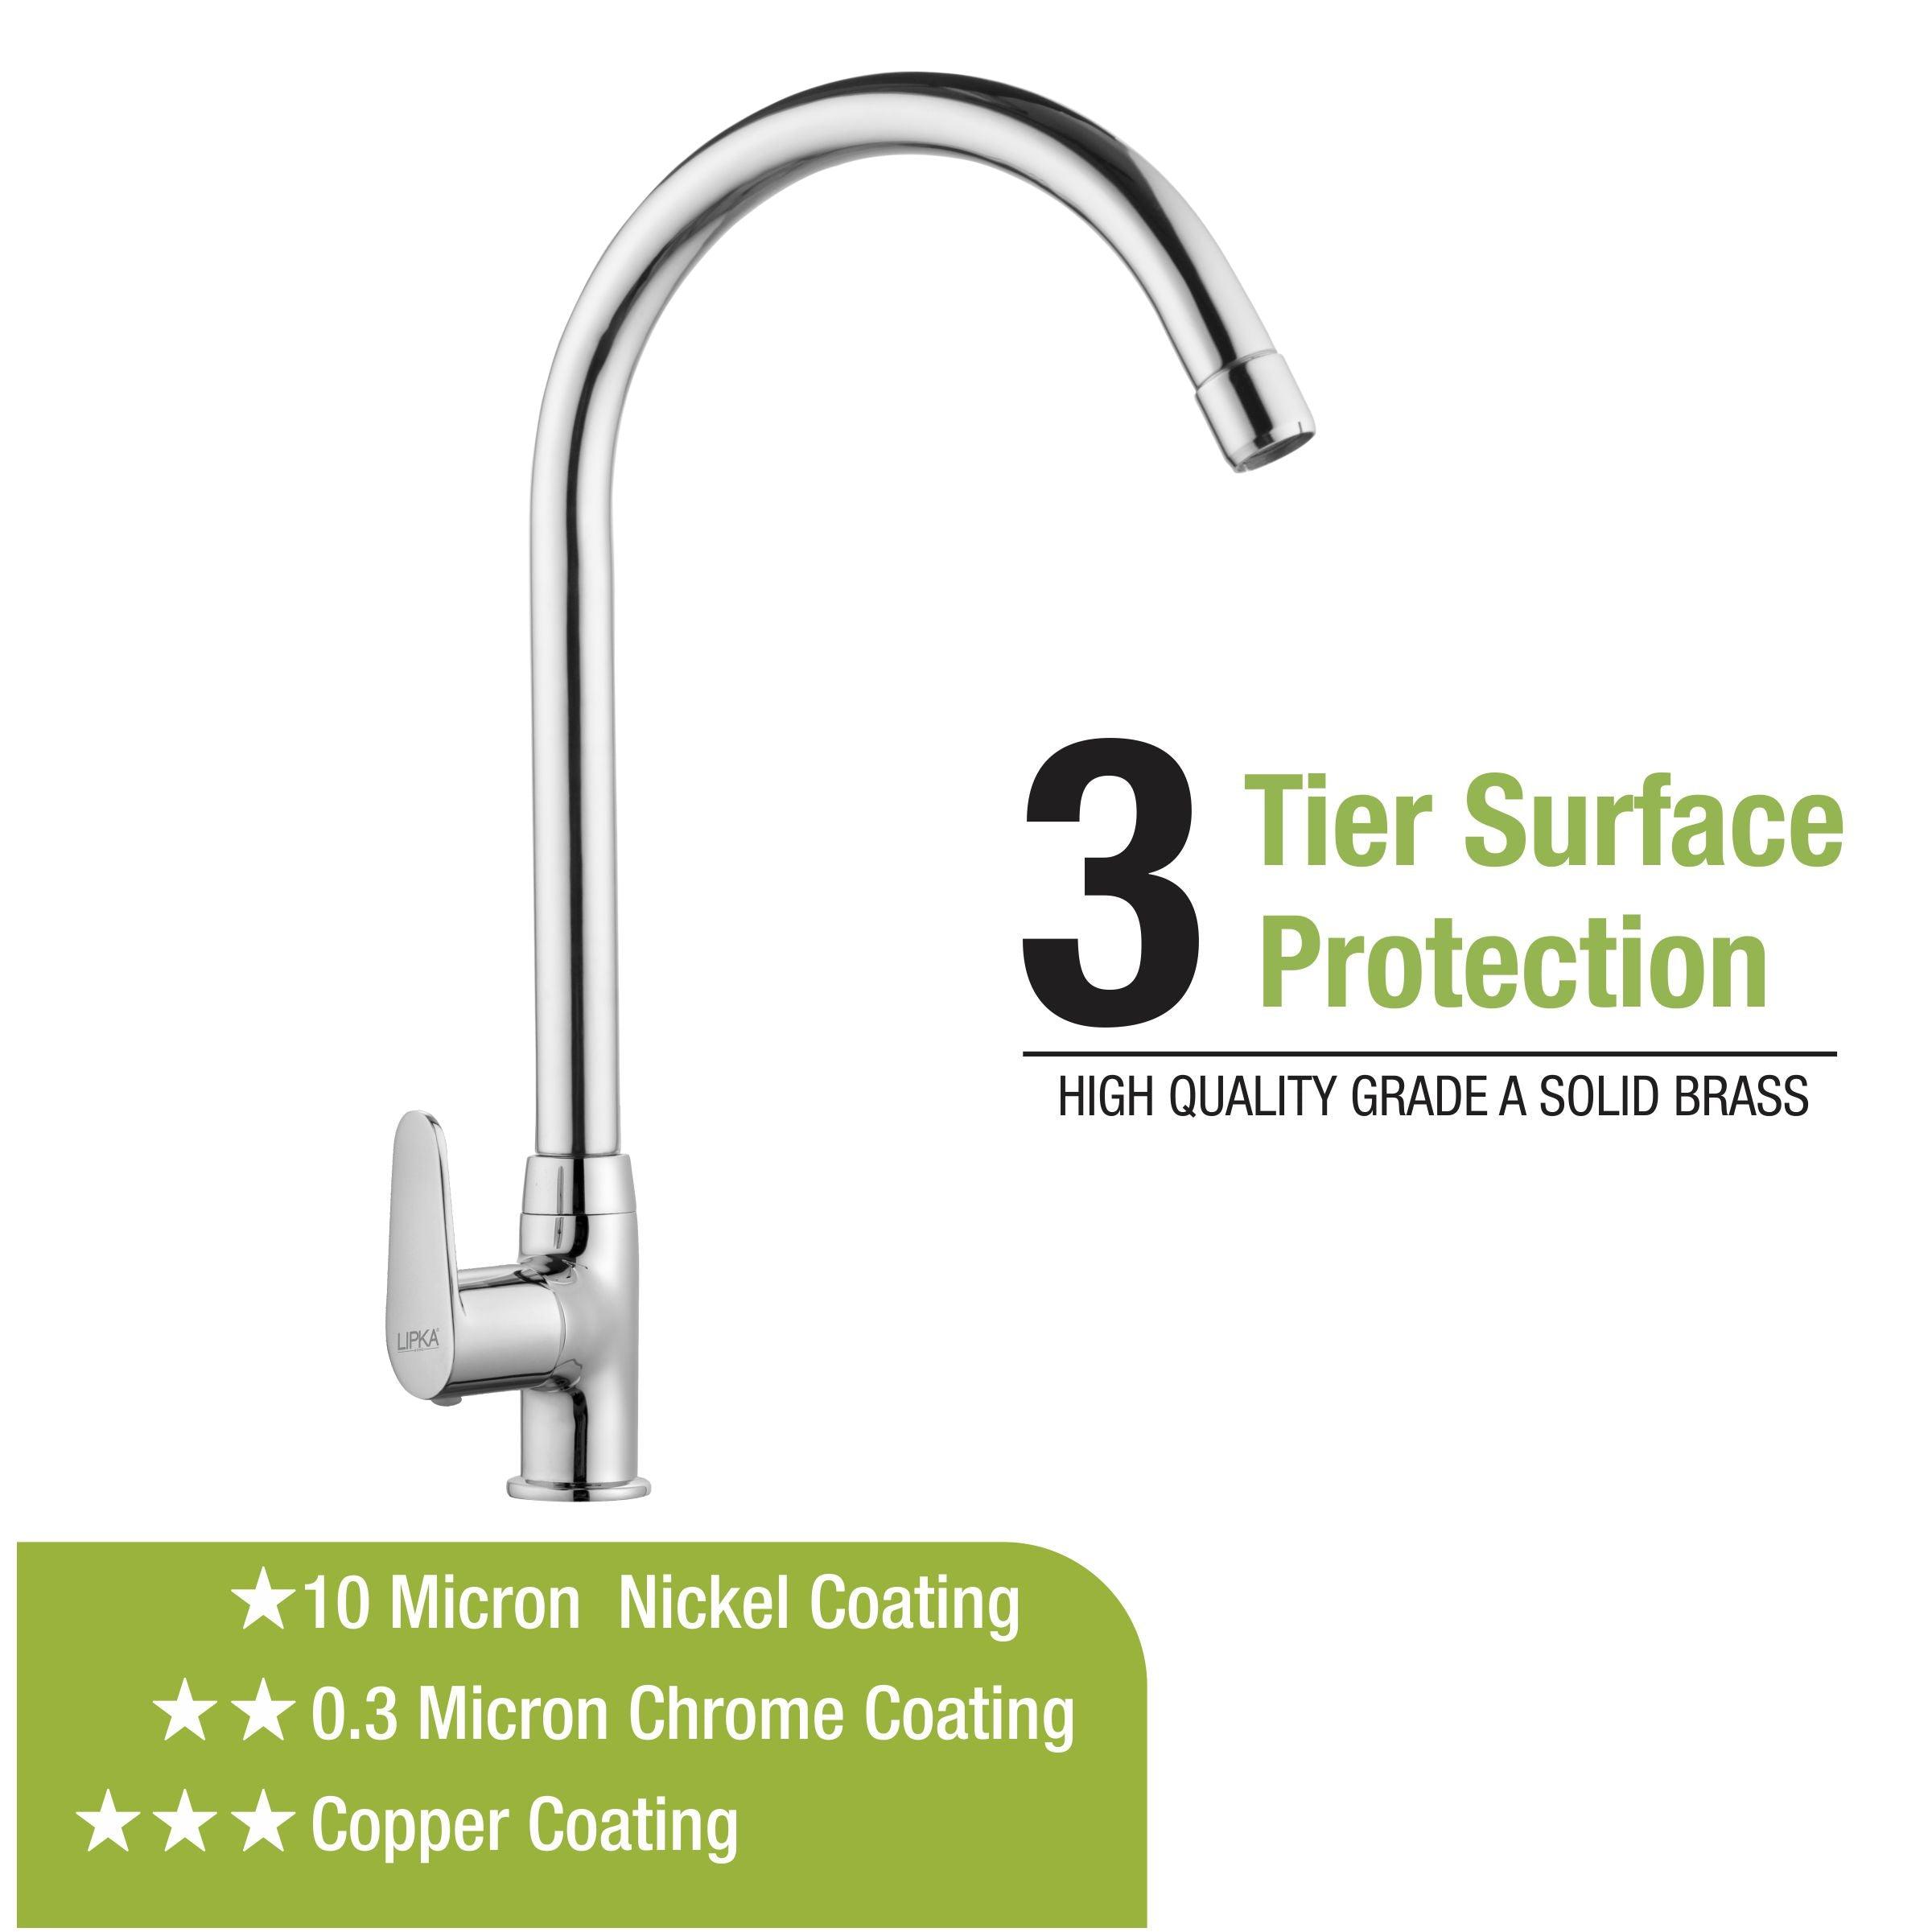 Virgo Swan Neck with Large (20 Inches) Round Swivel Spout Faucet 3 tier surface protection